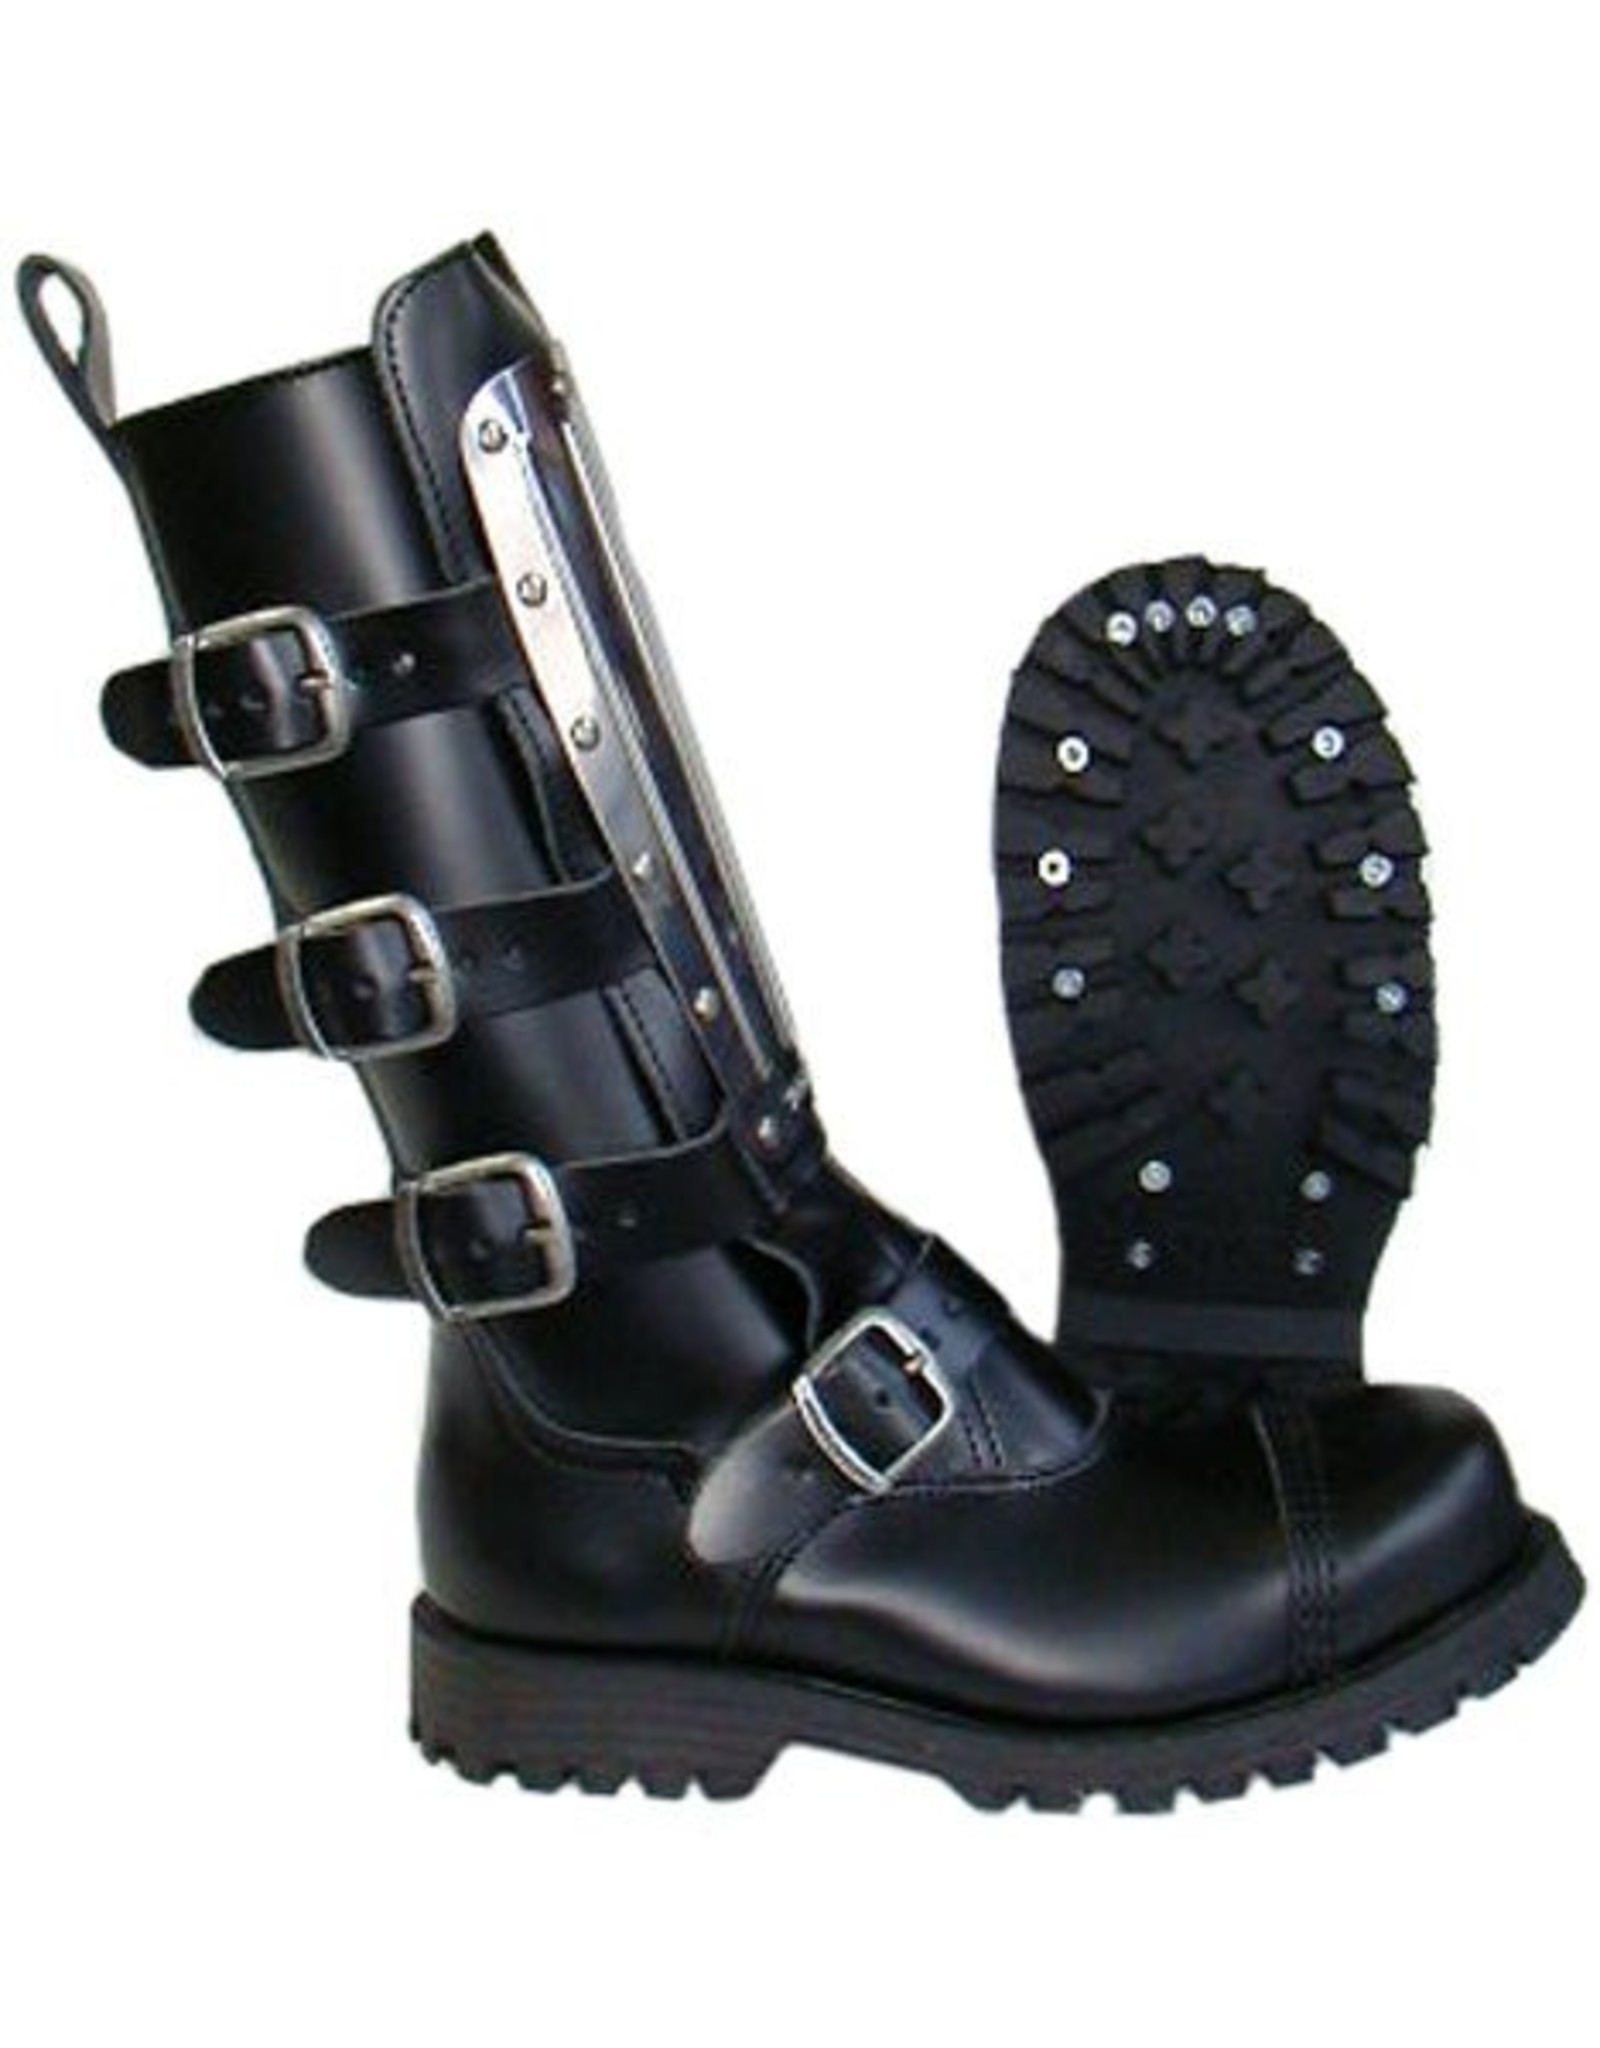 boots with steel plate